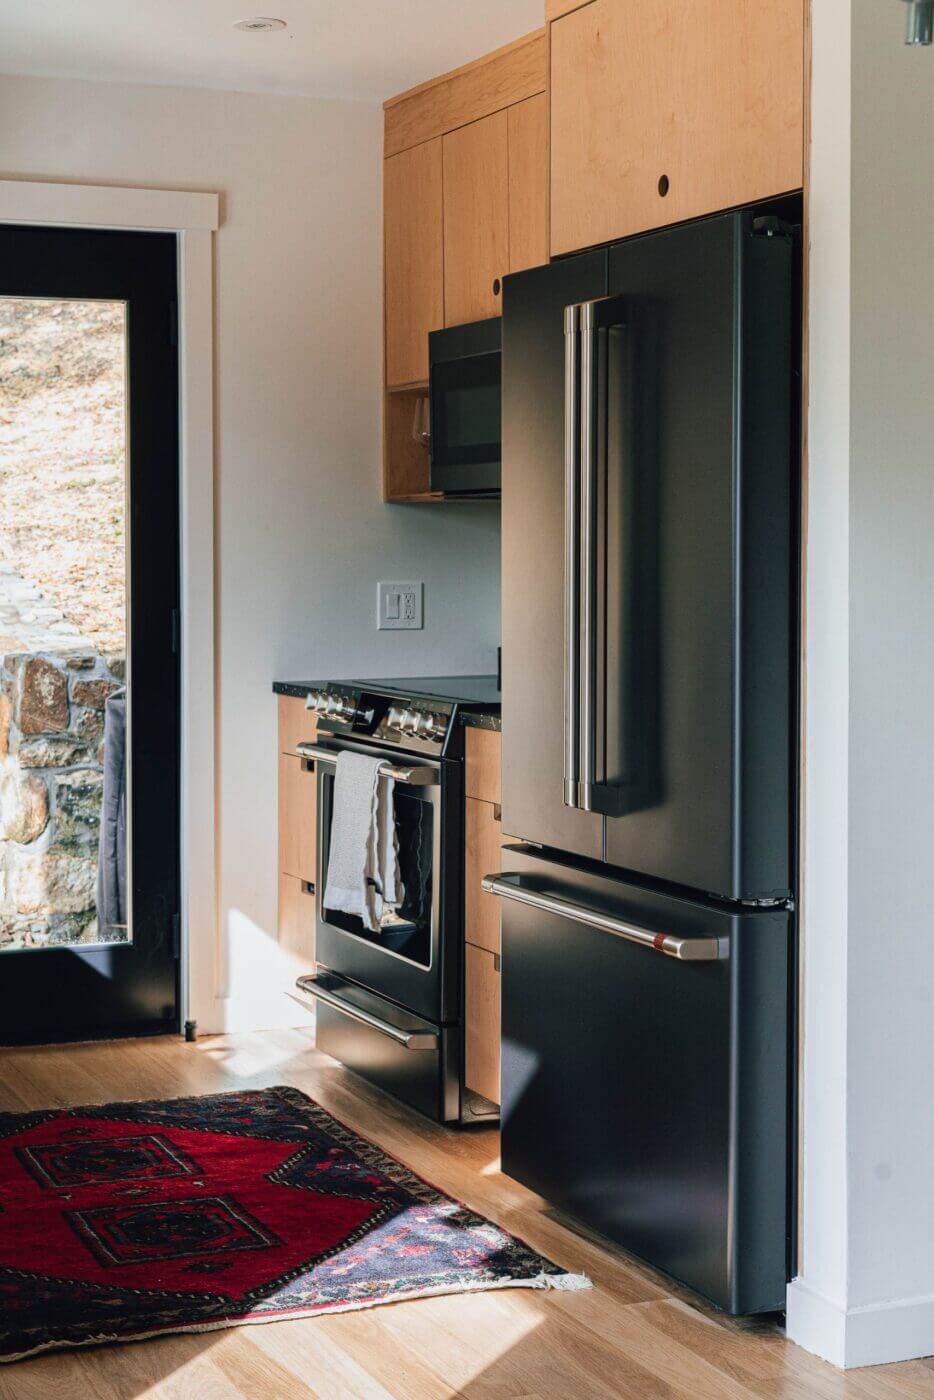 fridge and stove in modern plywood kitchen